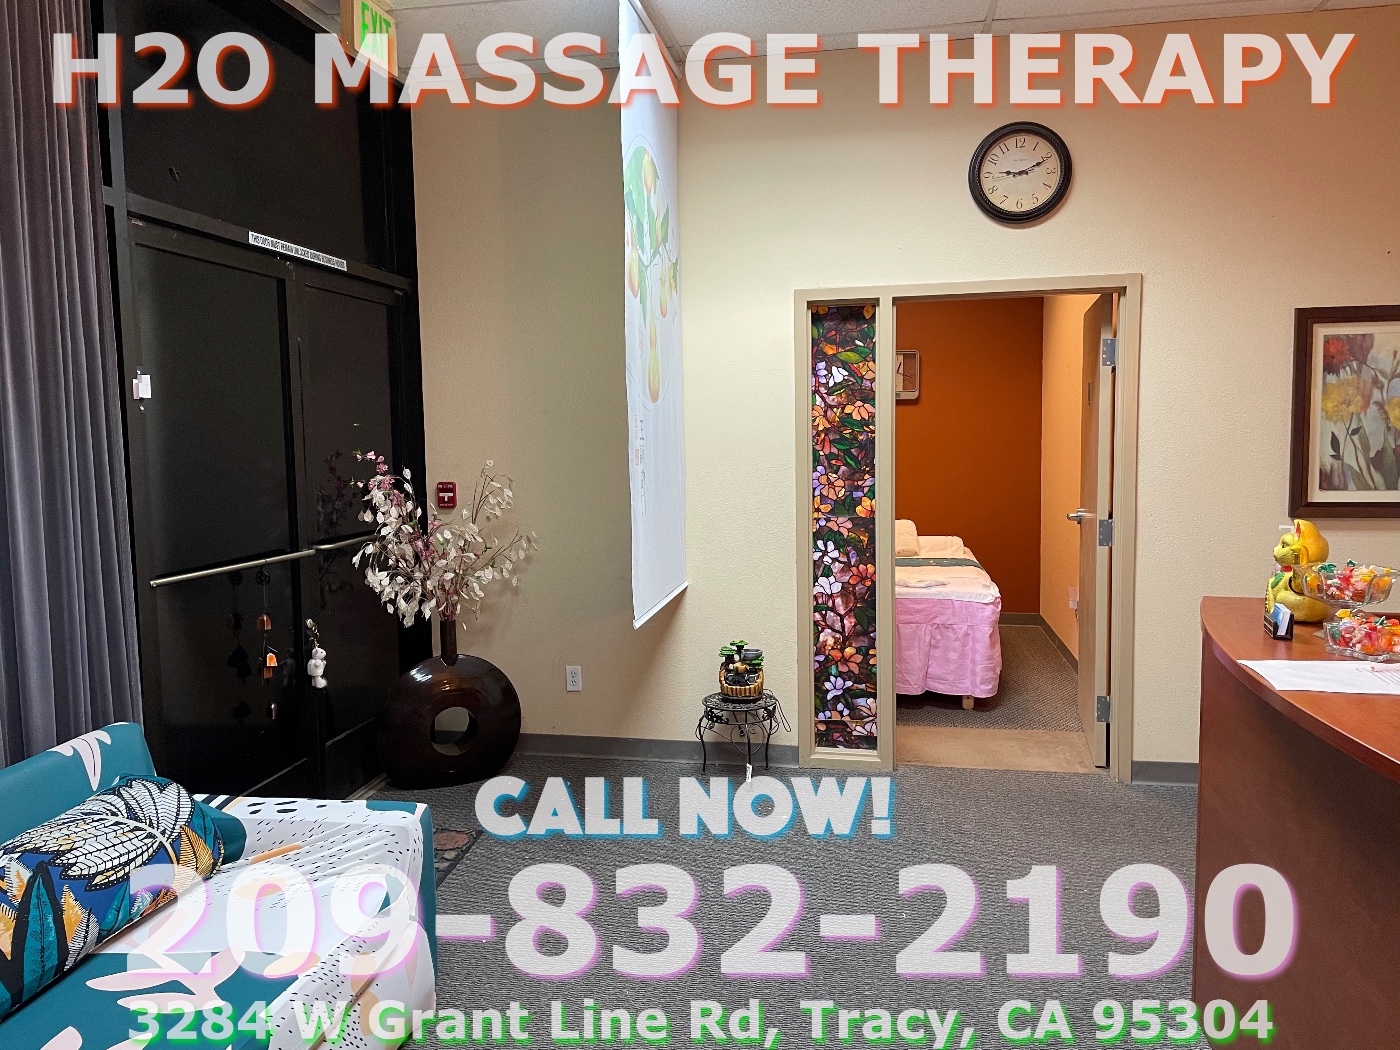 H2O Massage Therapy | 3284 W Grant Line Rd, Tracy, CA 95304, United States | Phone: (209) 832-2190